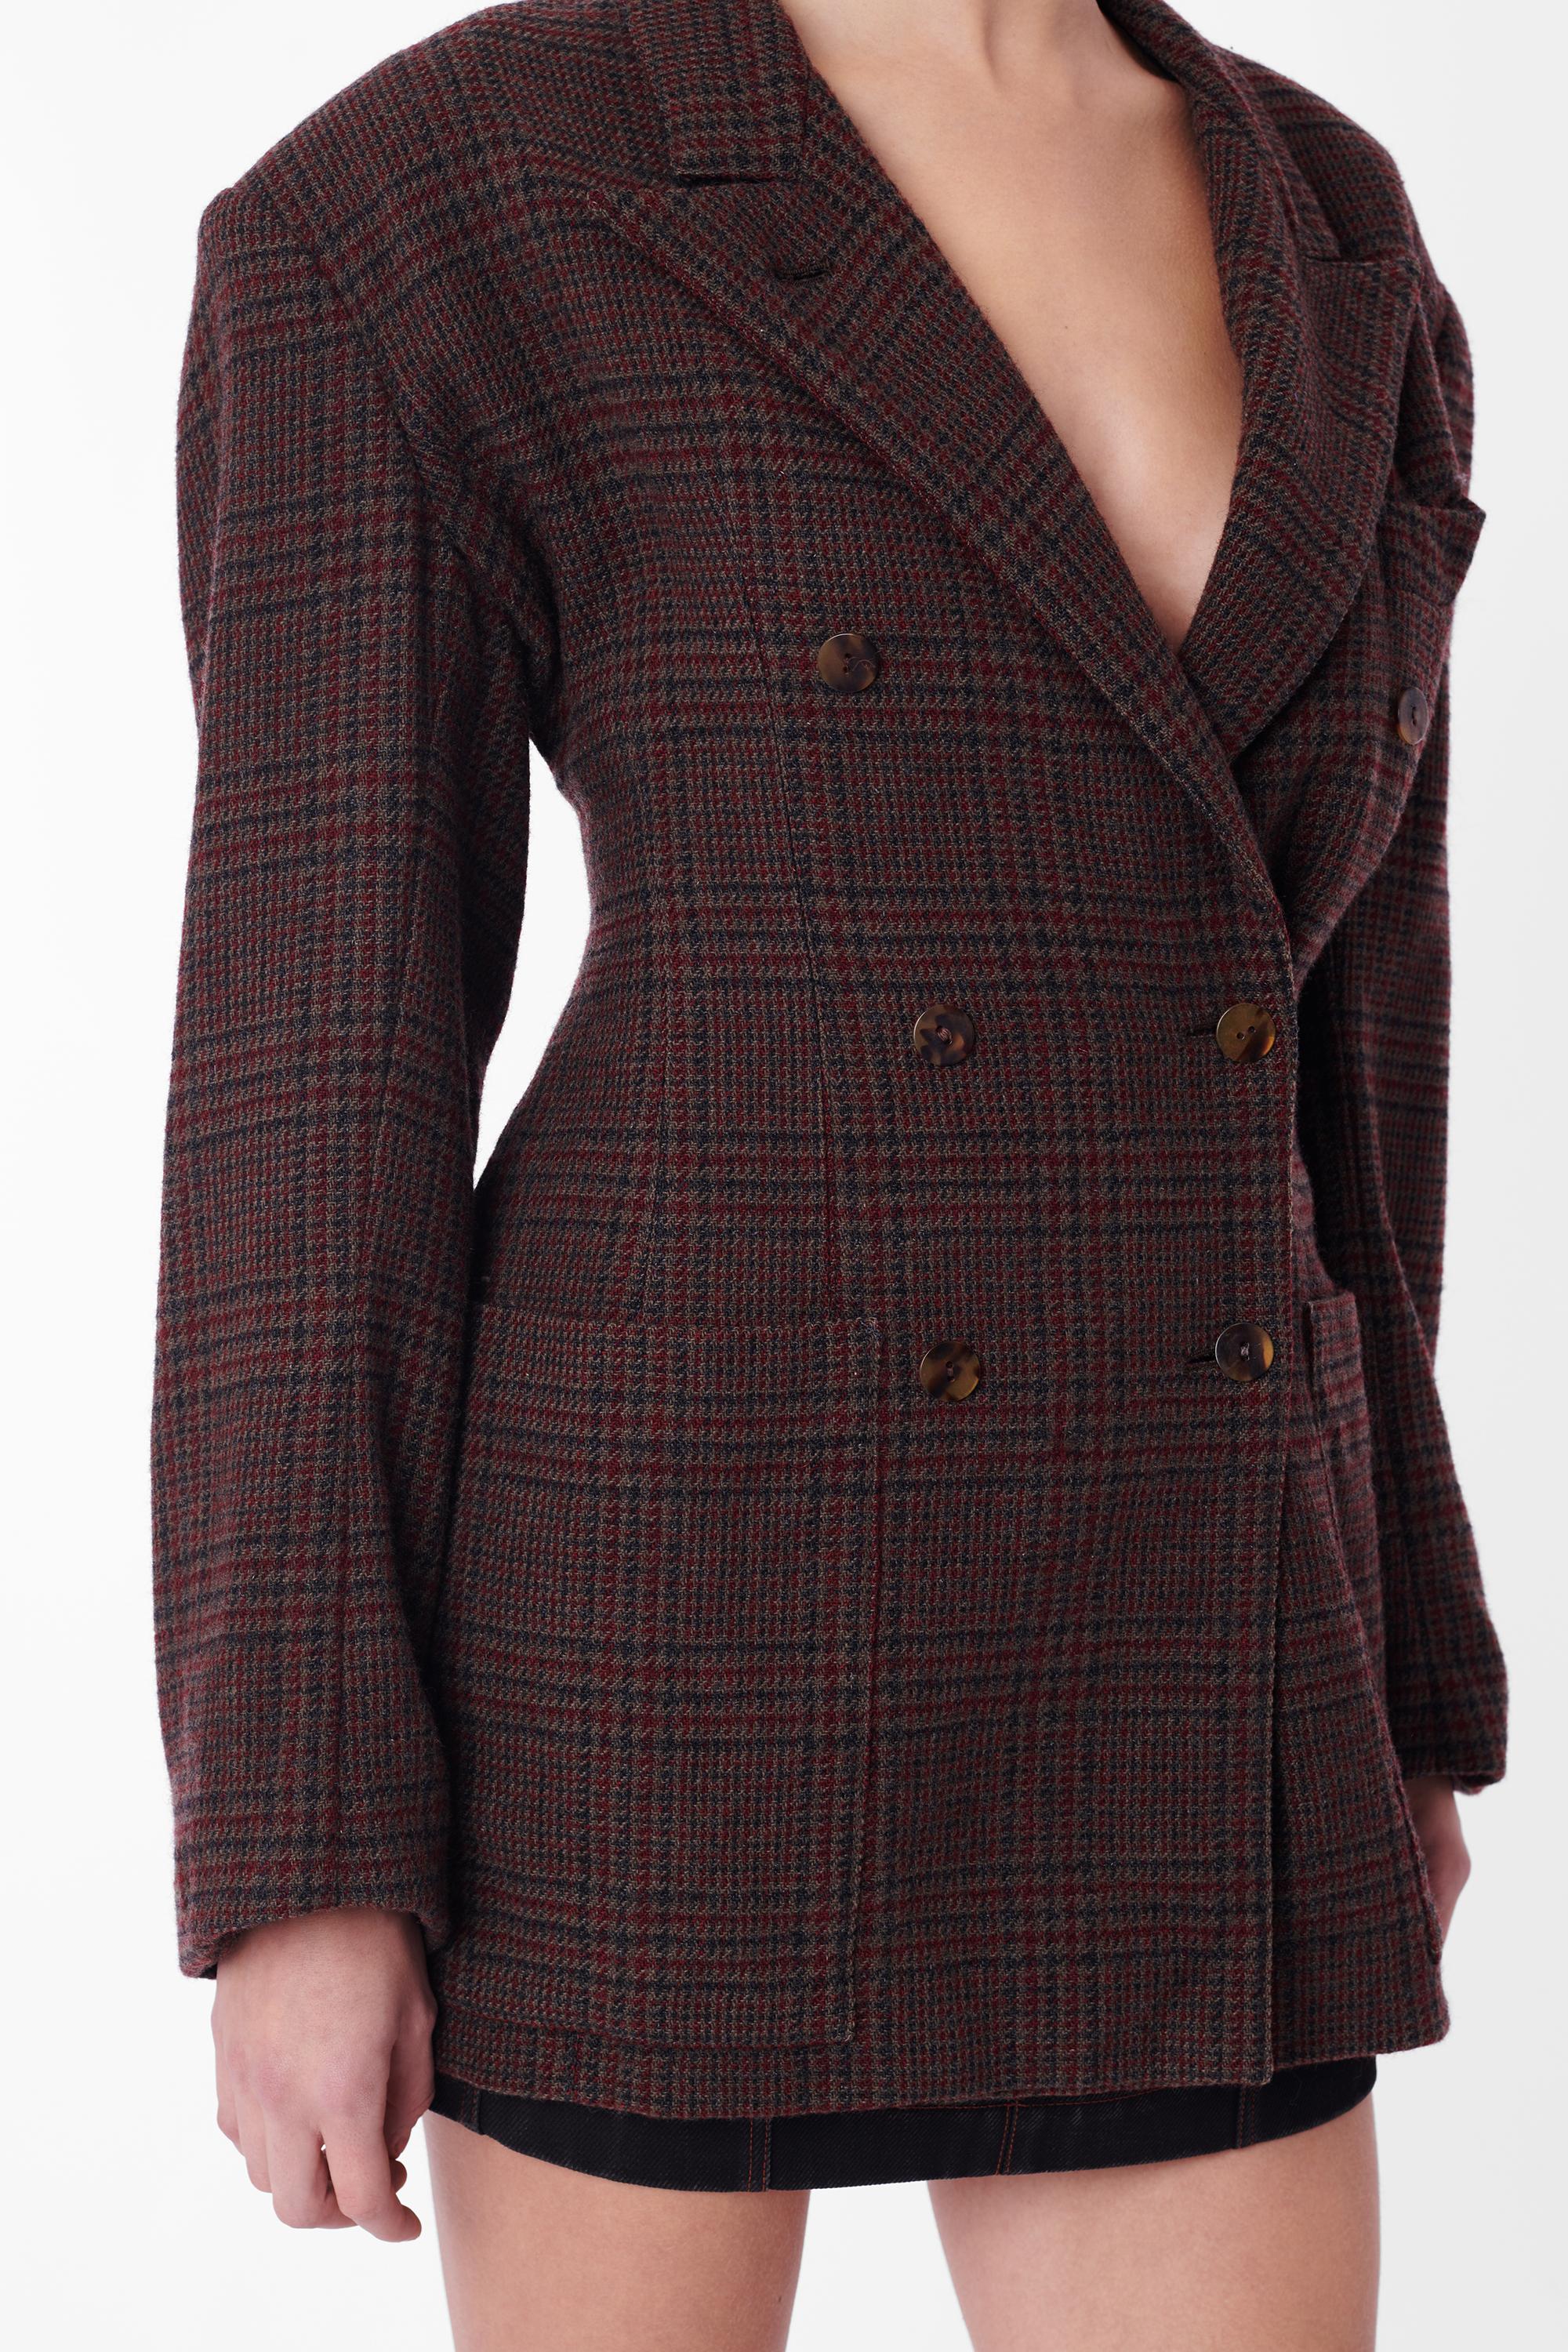 Vintage Double Breasted Wool Blazer In Good Condition For Sale In London, GB